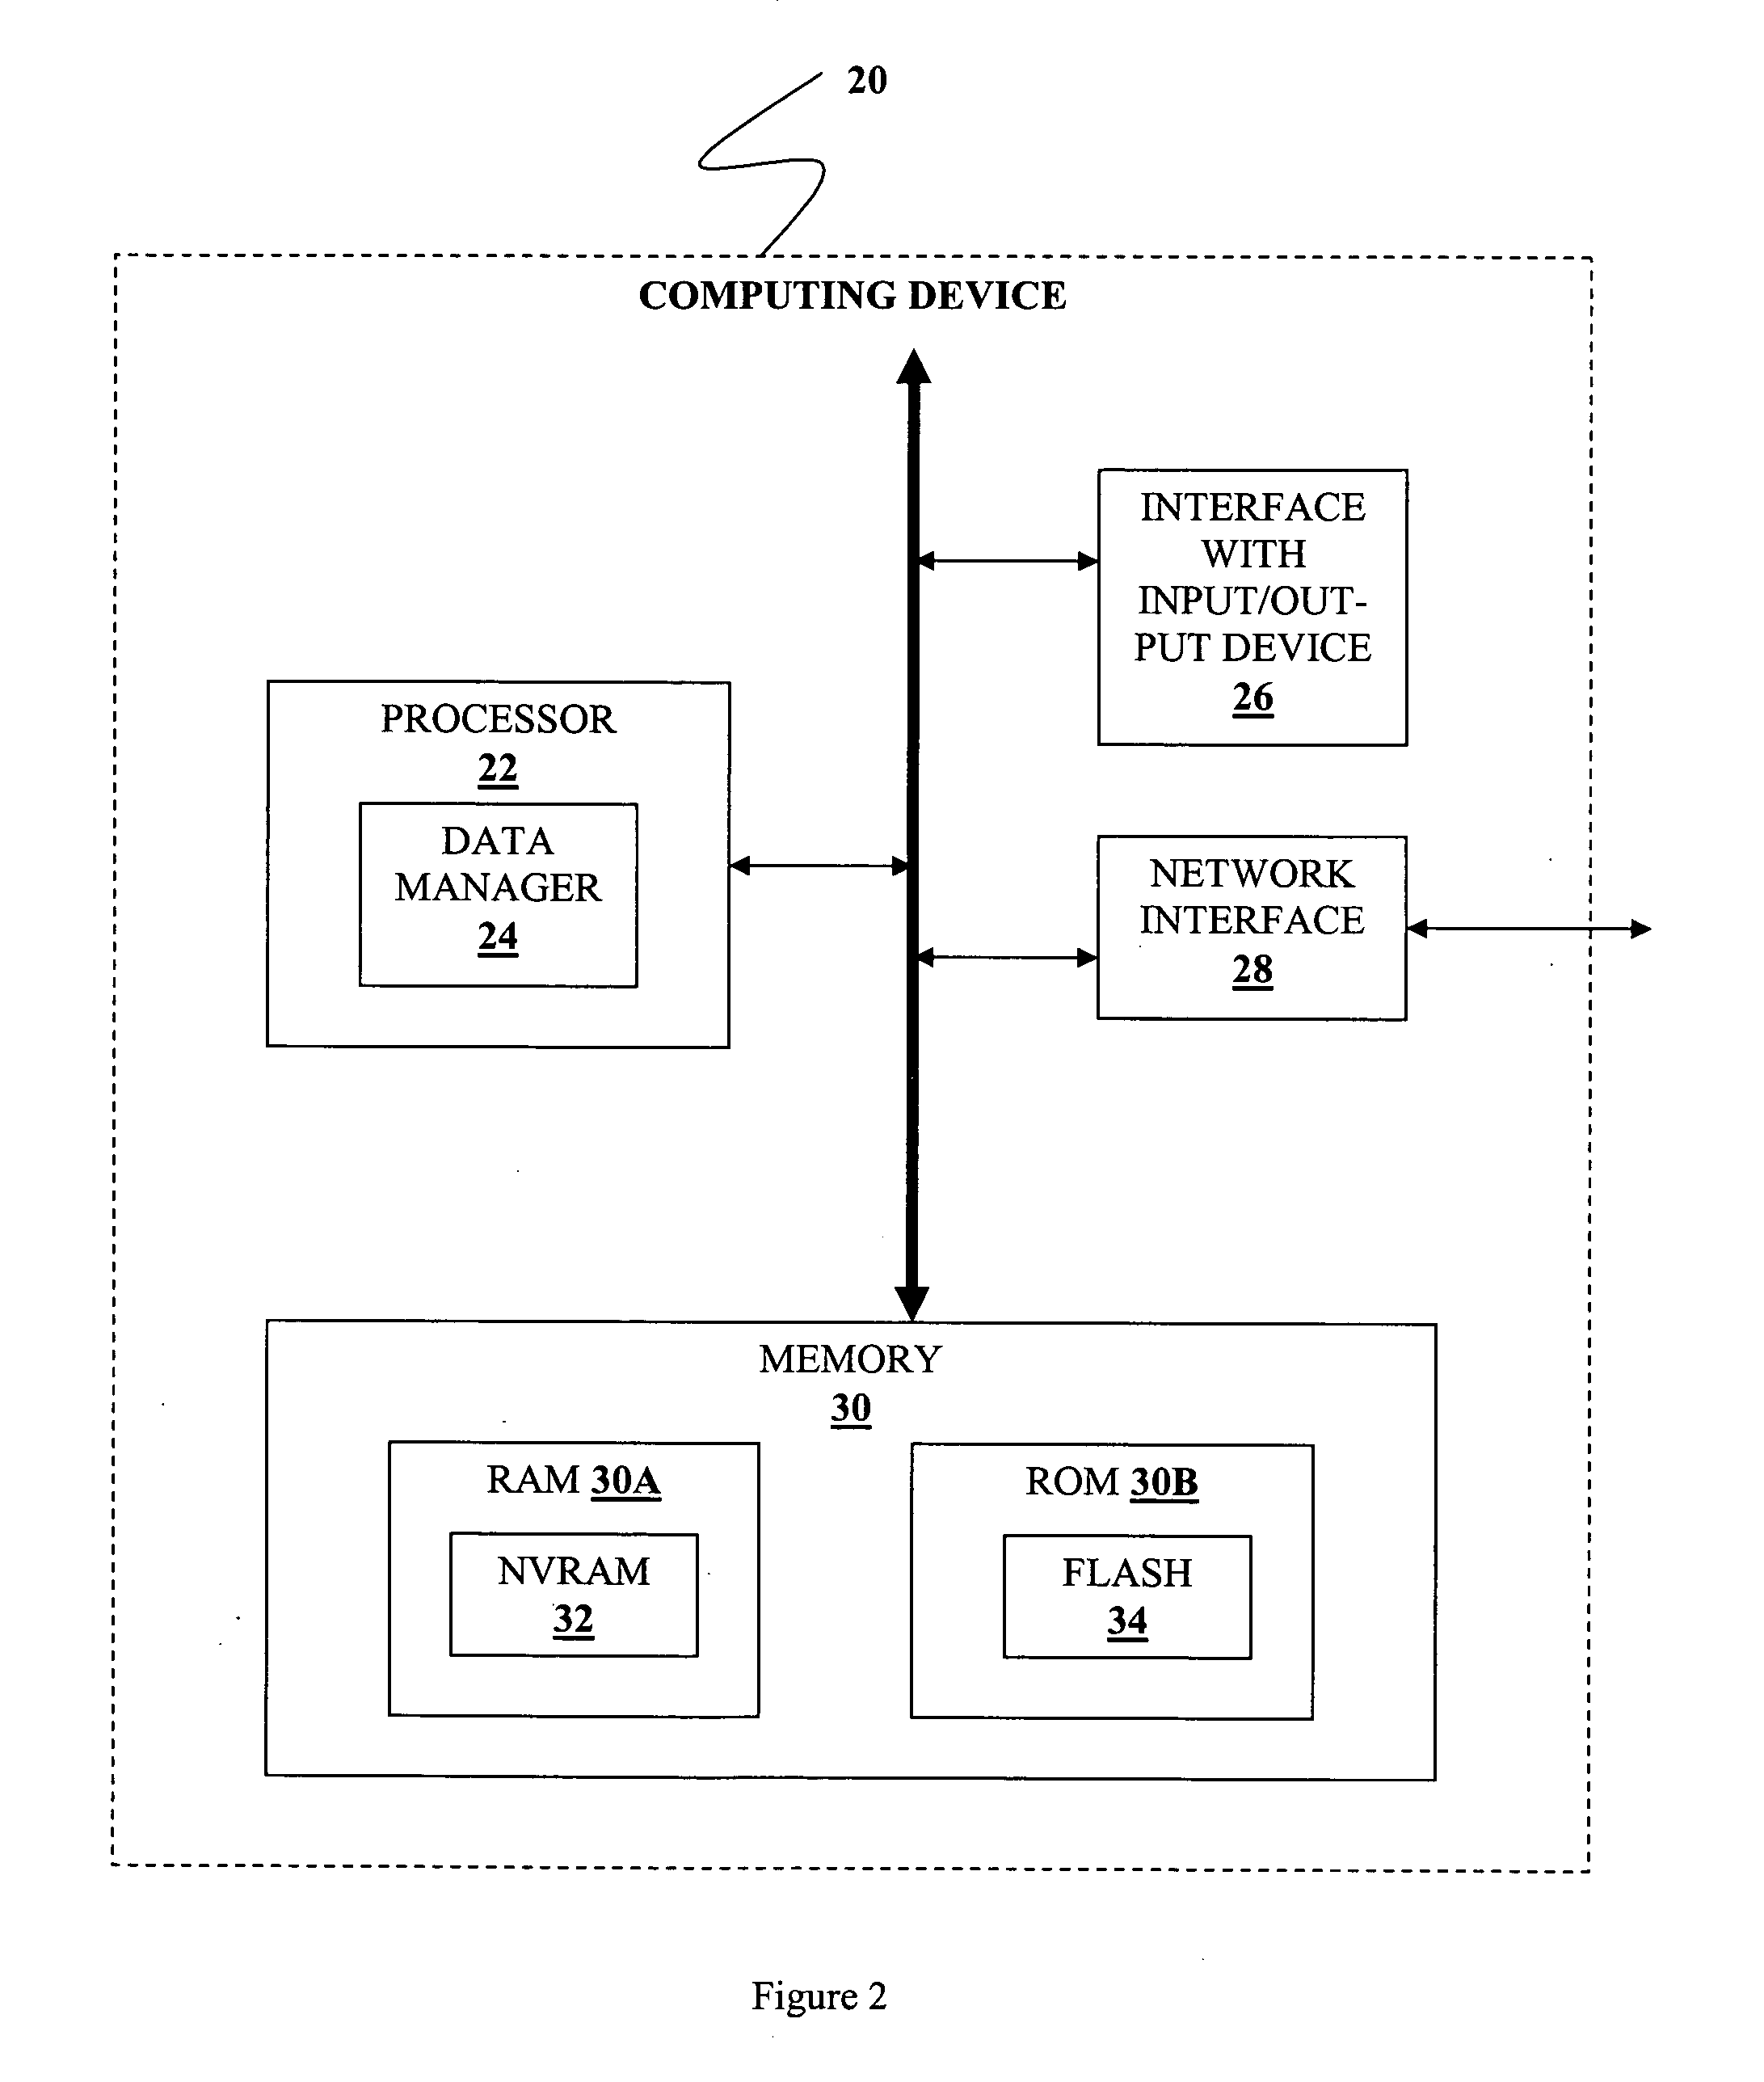 Systems, methods, computer readable medium and apparatus for memory management using NVRAM